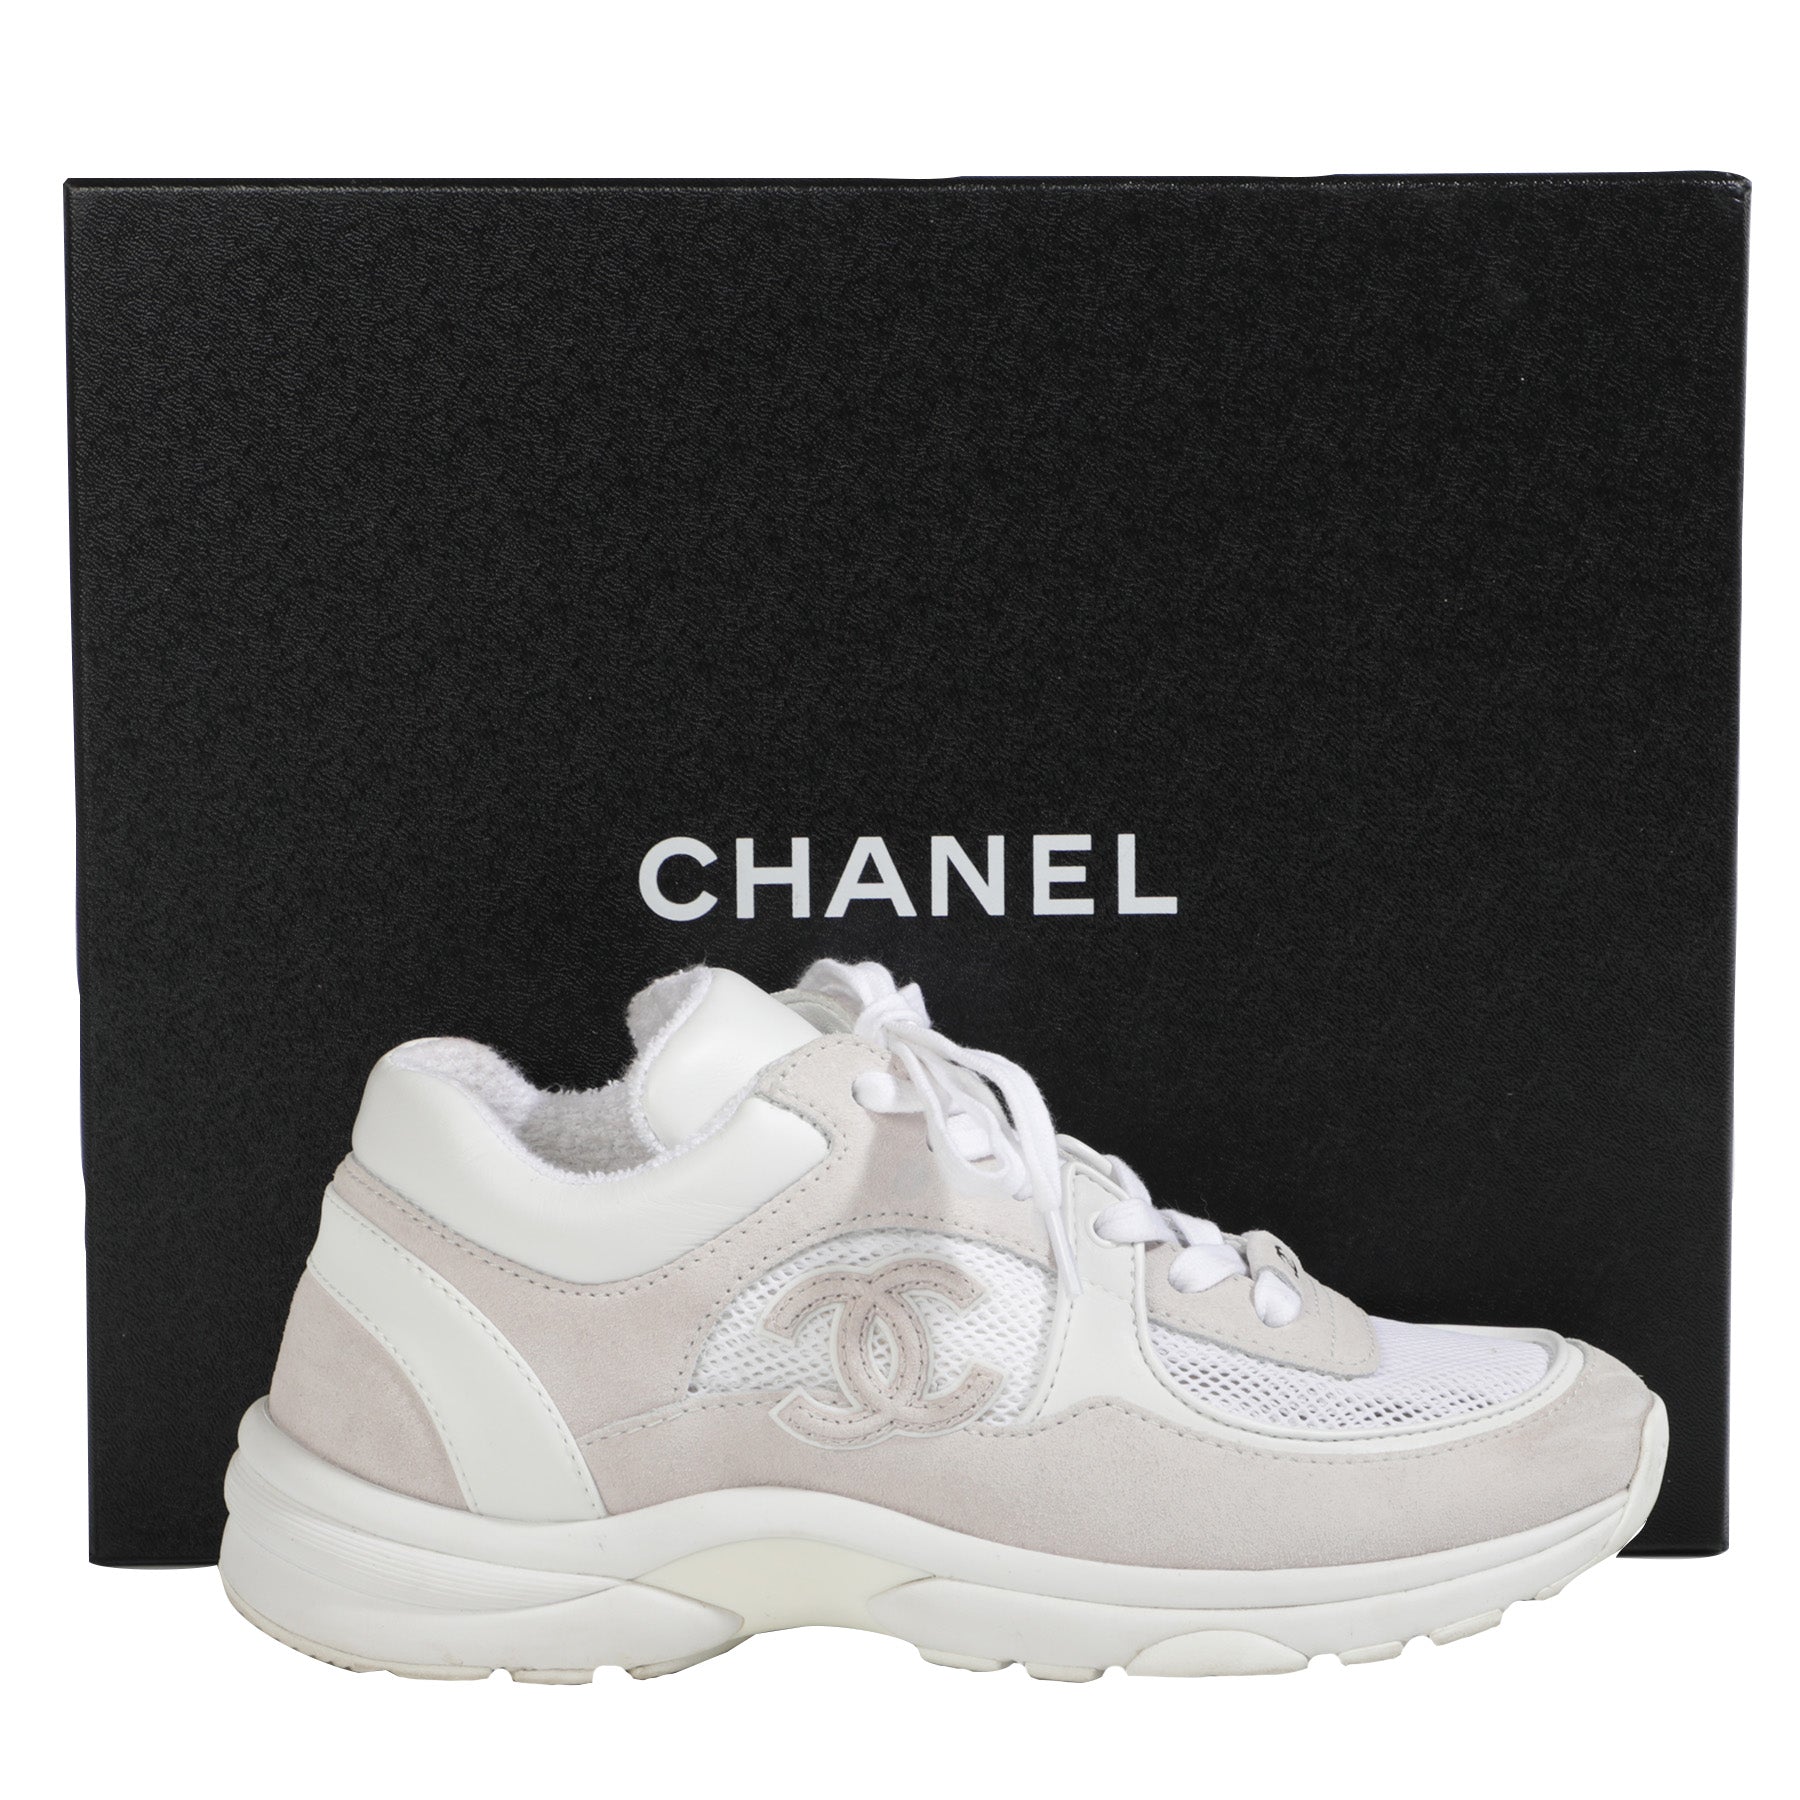 Chanel Suede Calfskin CC Sneakers in Black Size 36